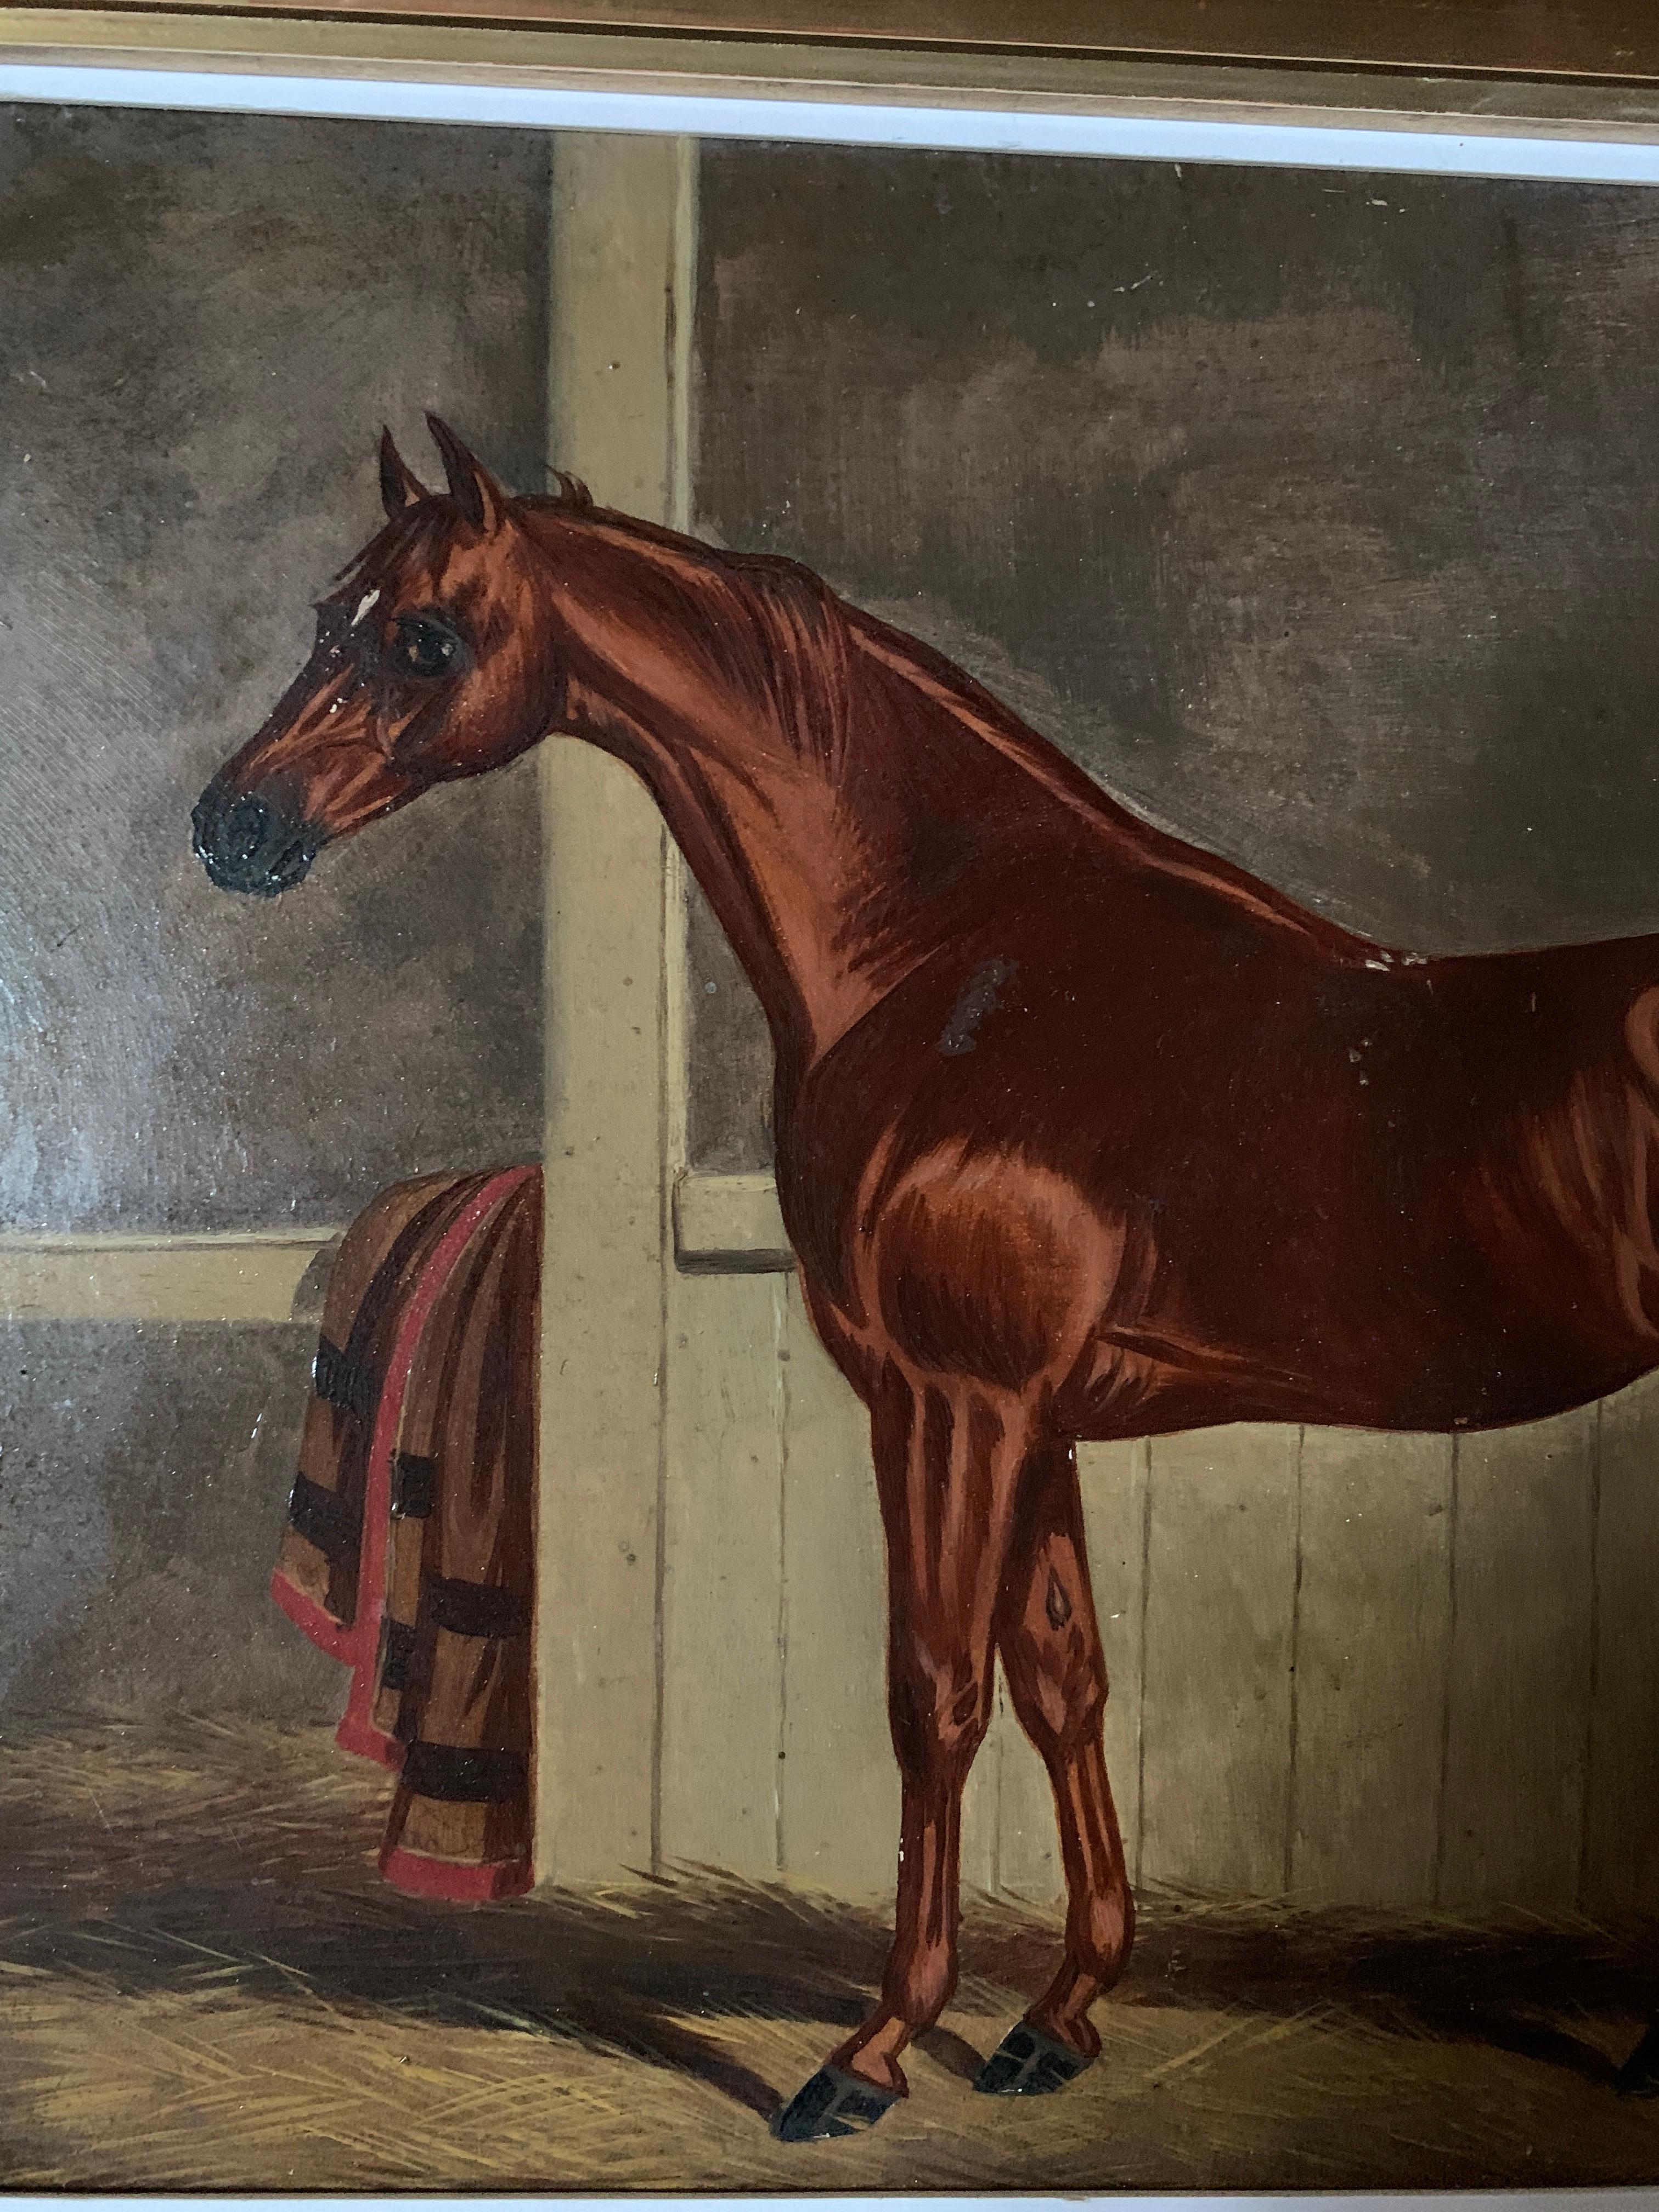 19th century English Antique Portrait of an Chestnut Horse in a stable in oils - Painting by Edwin Loder